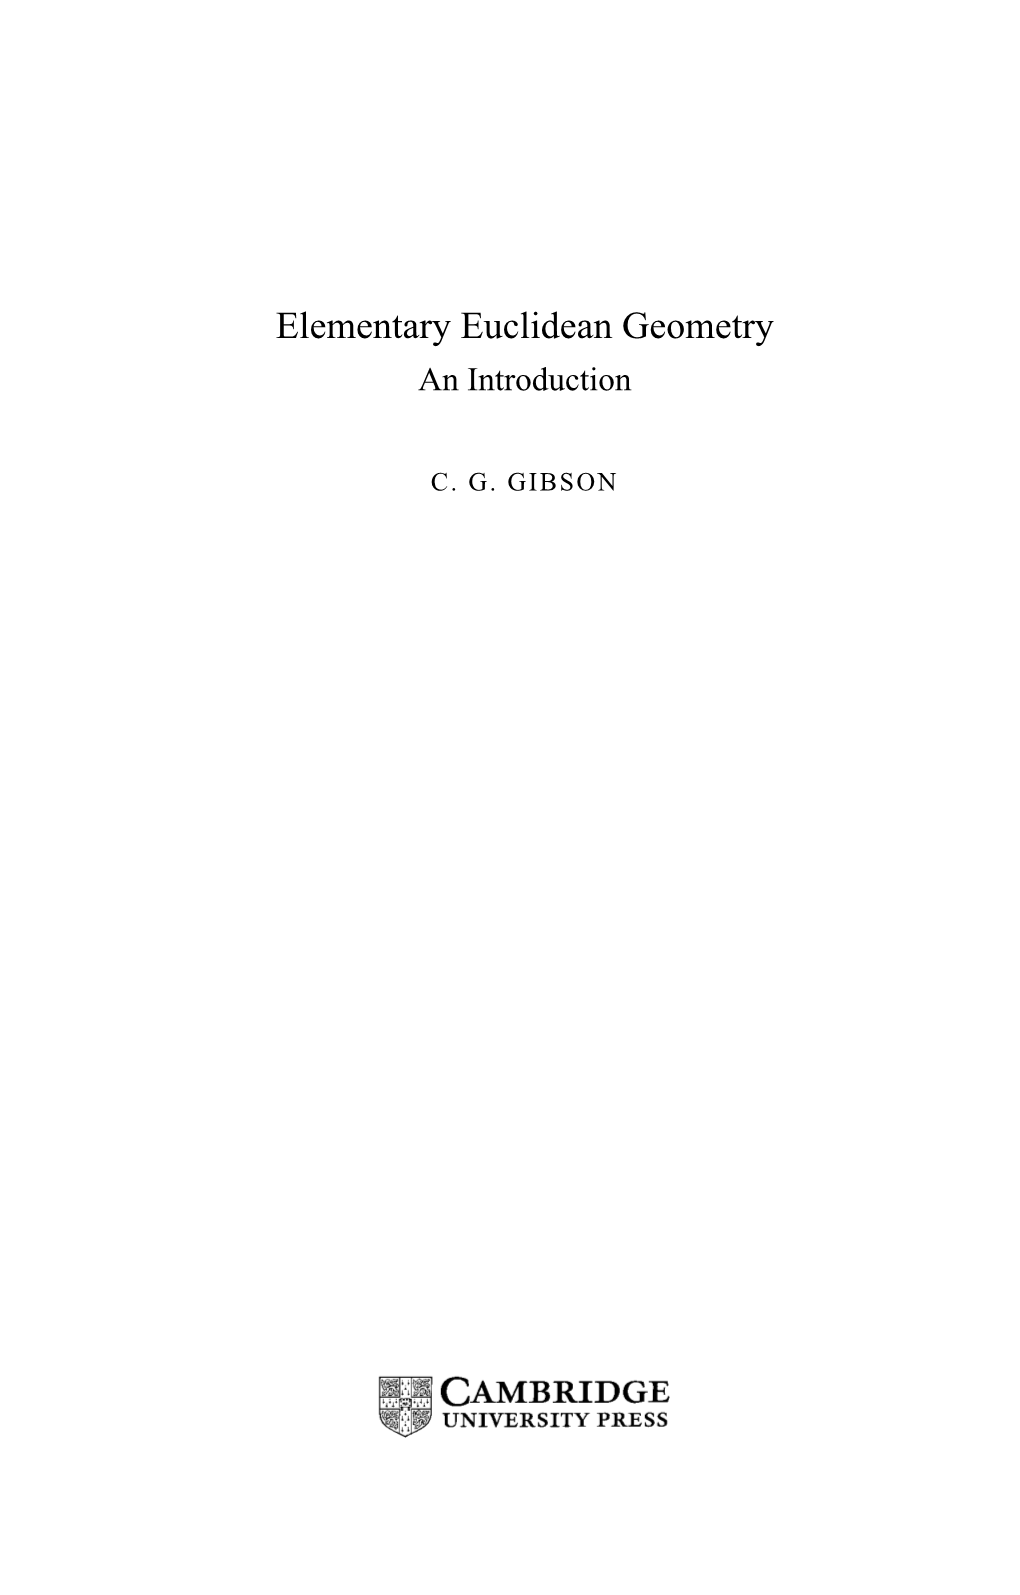 Elementary Euclidean Geometry an Introduction